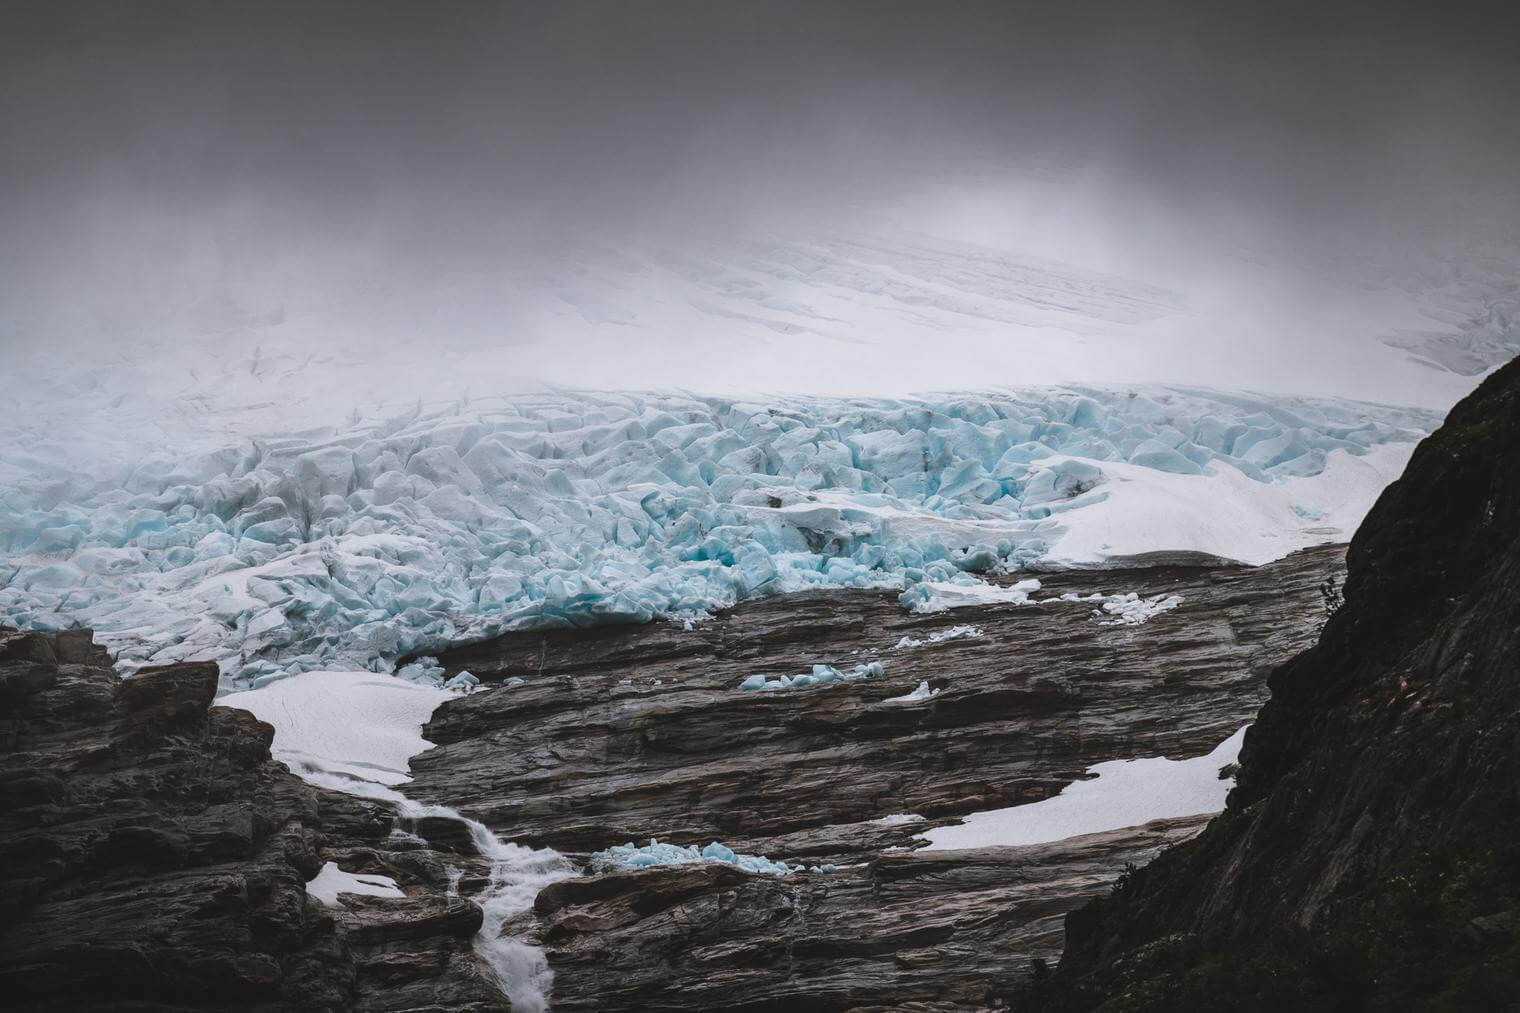 Glacier in the Clouds - Edited with Northlandscapes Signature Lightroom Presets